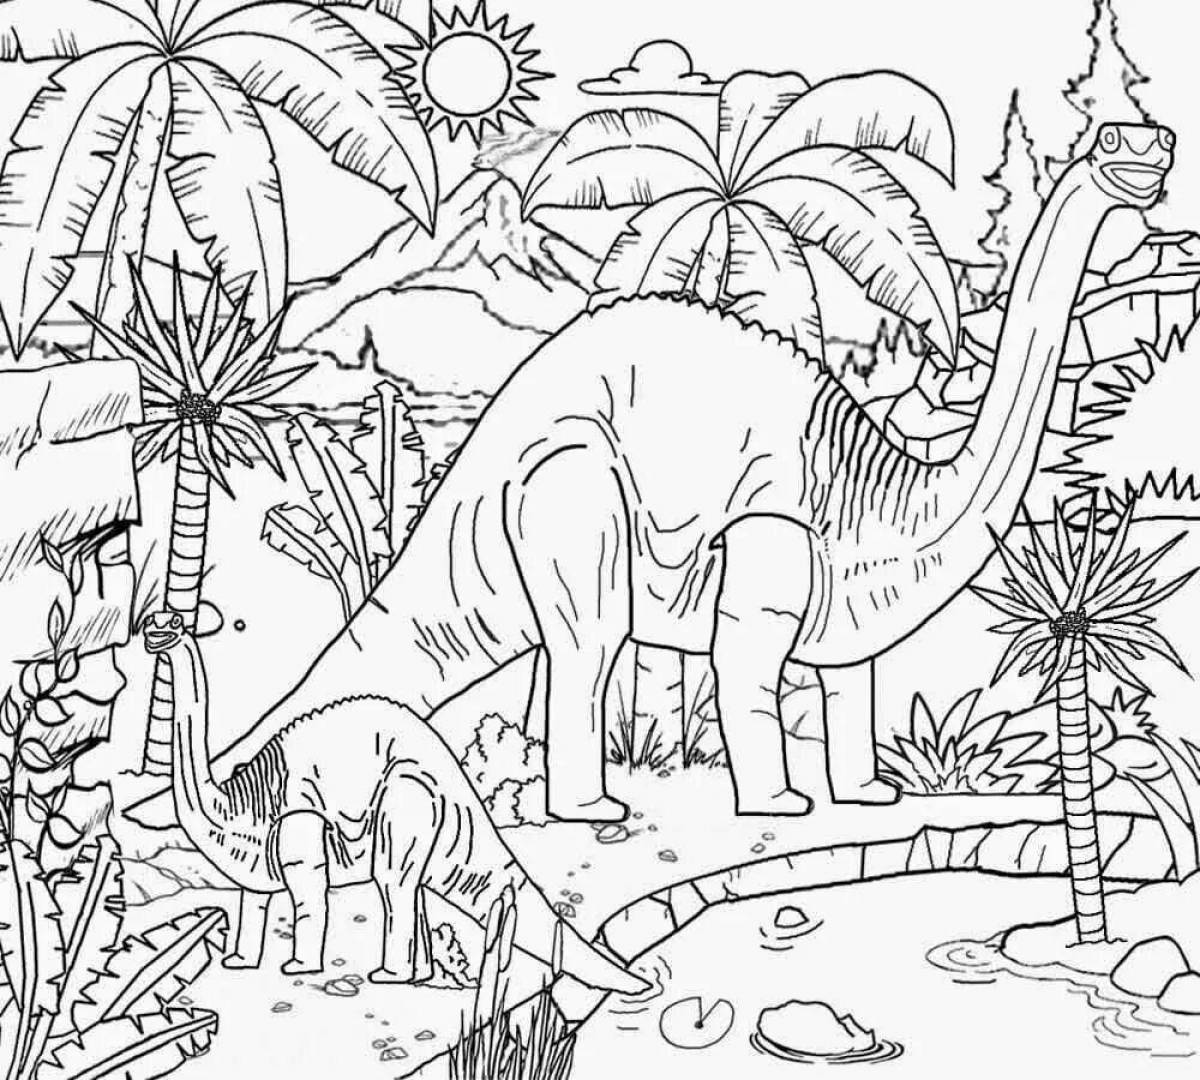 Huge jurassic park dinosaurs coloring page